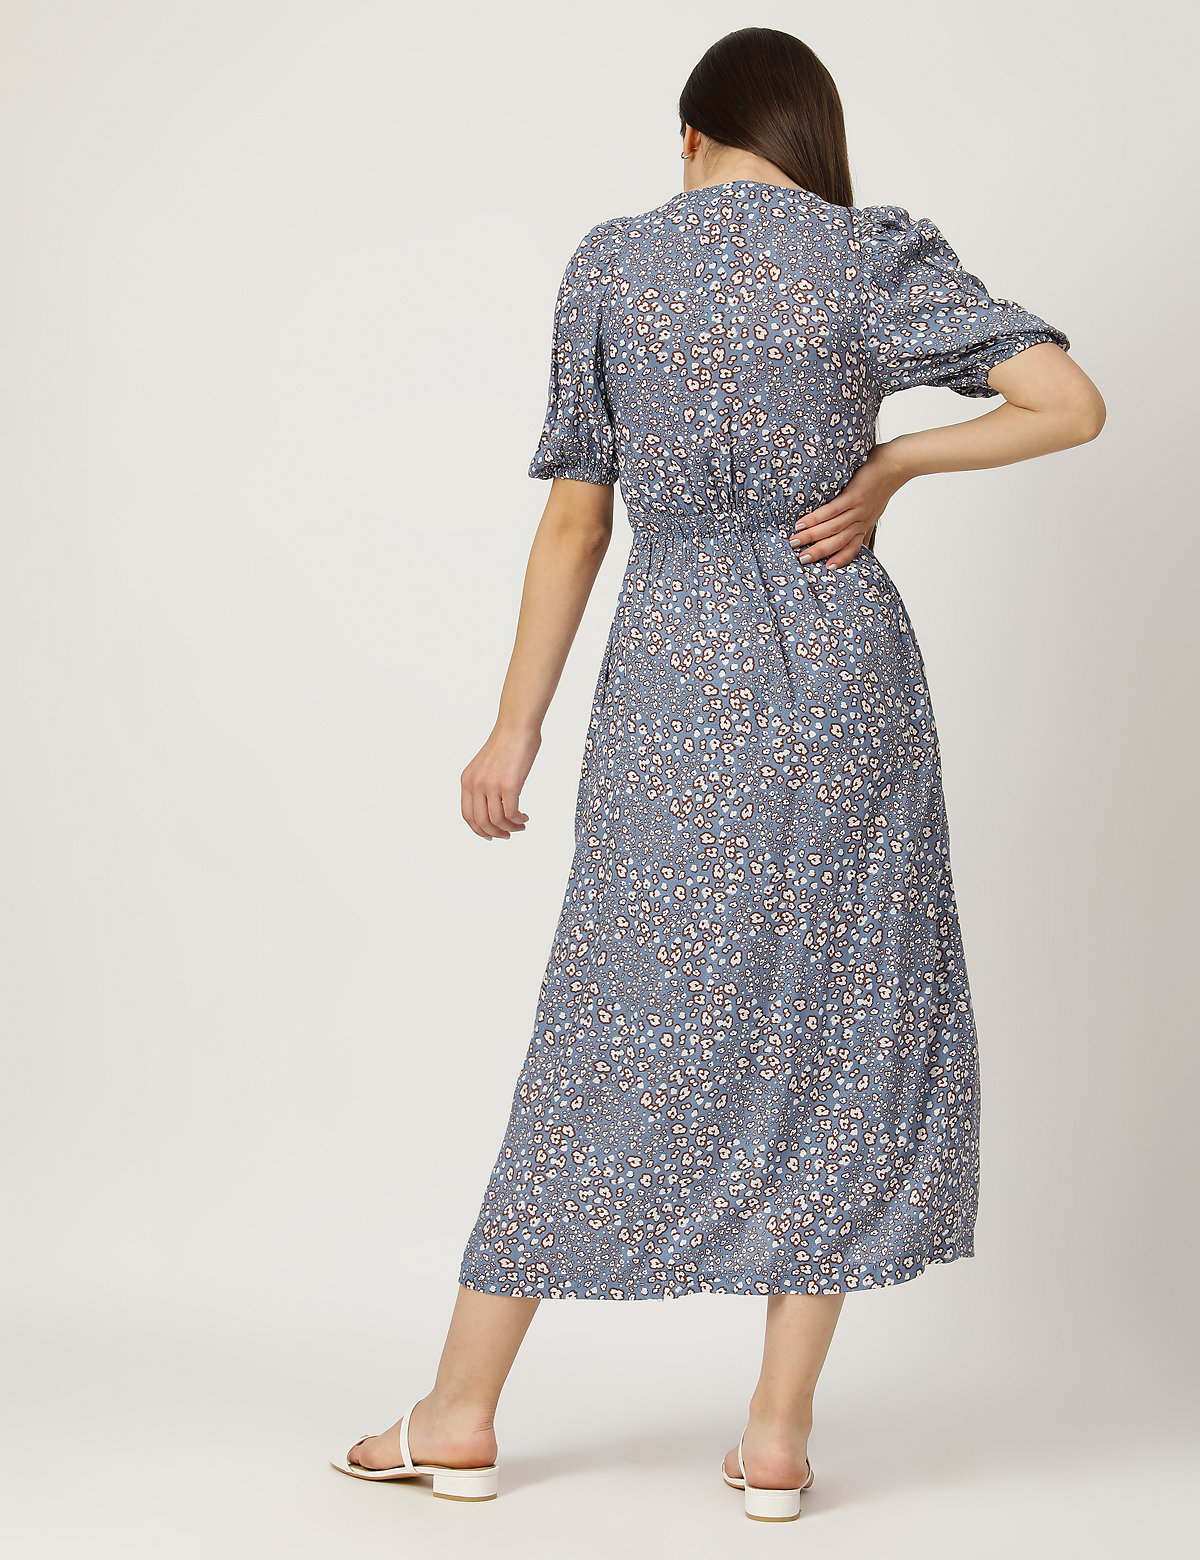 Pure Modal Printed Tie-up Neck Dress